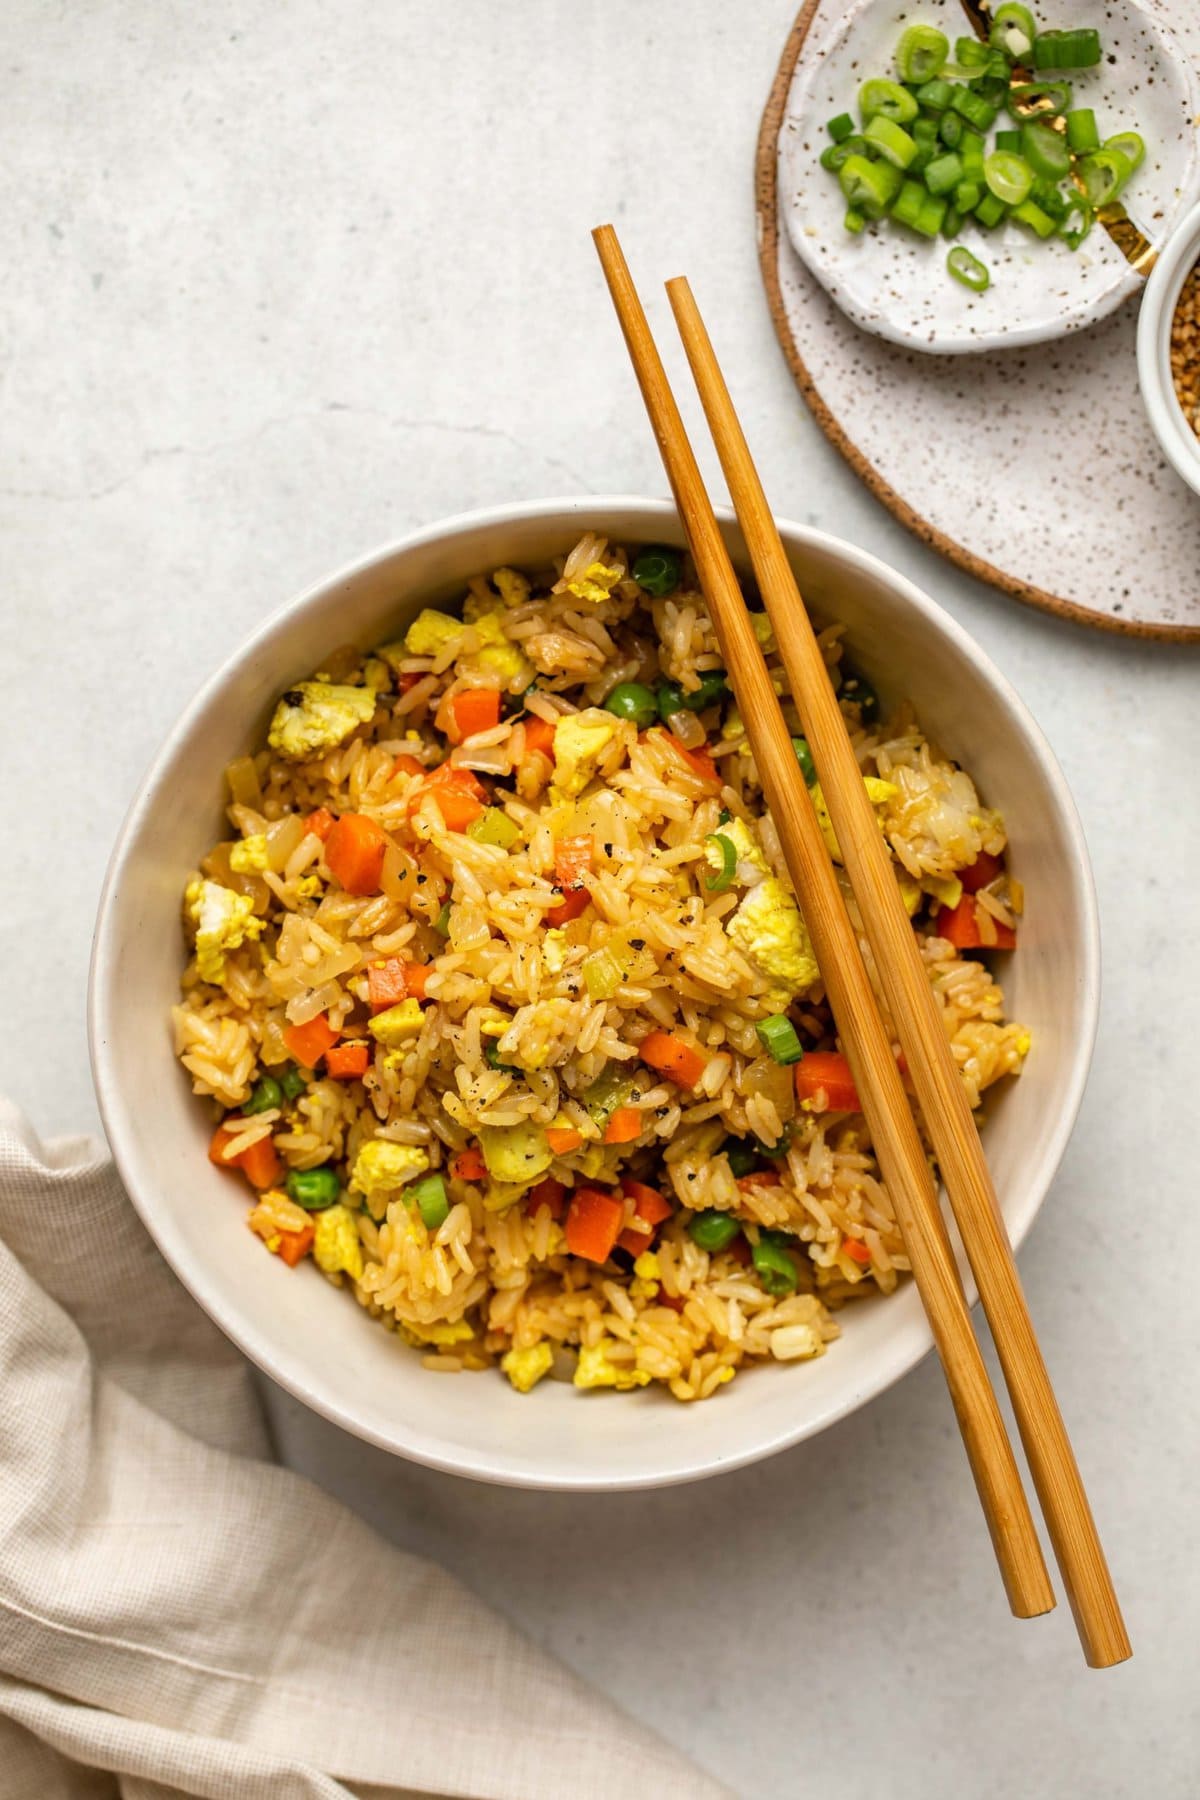 fried rice in white bowl with chopsticks and small dish of sliced green onions on the side